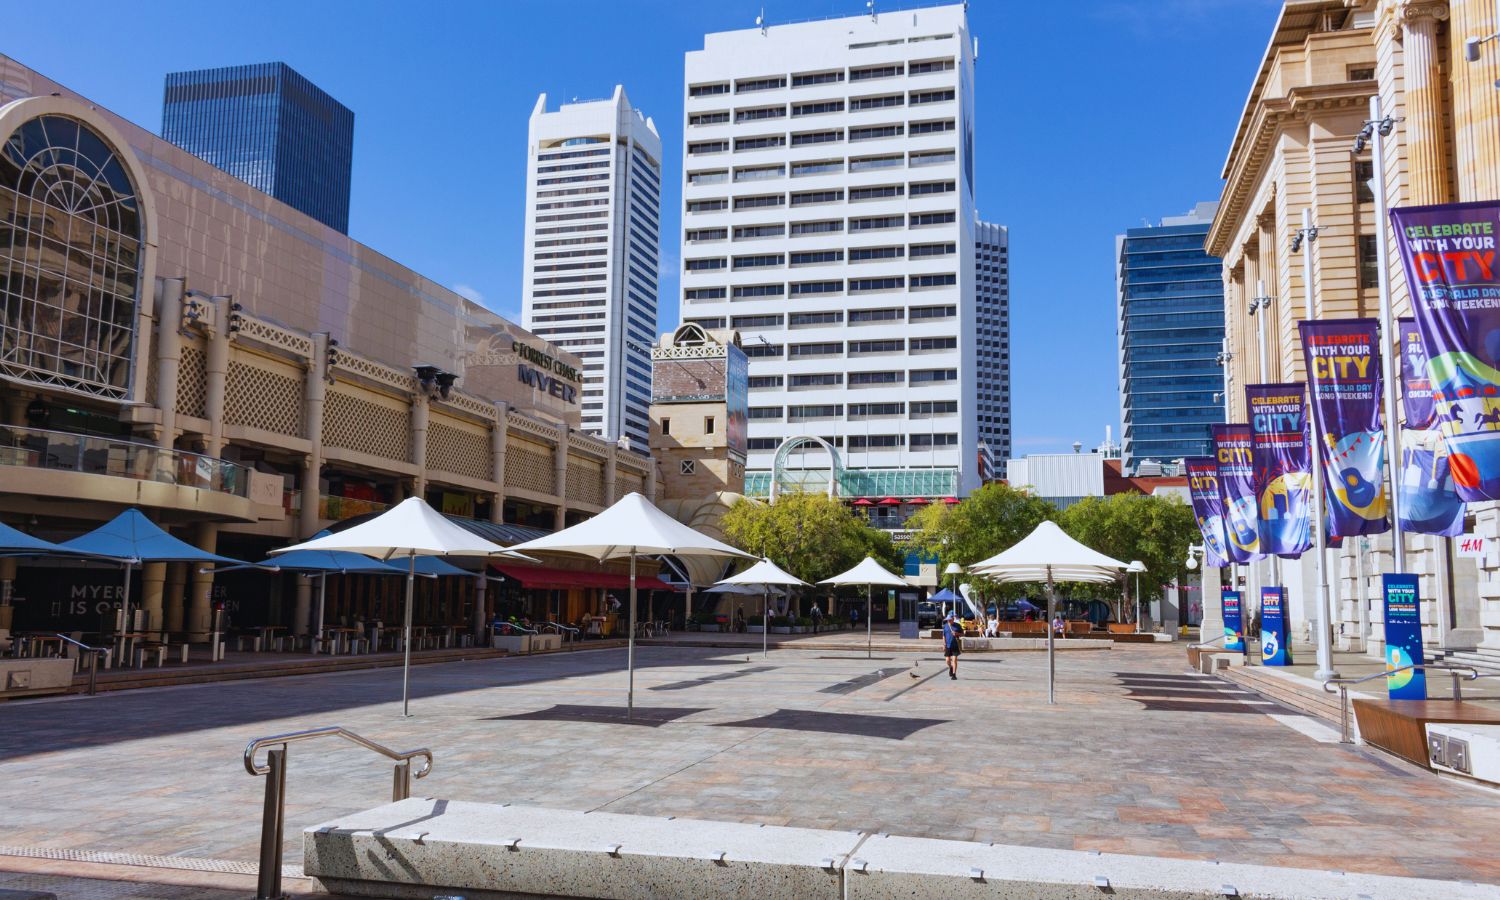 An image showing forrest place in perth, a great spot to watch the 2023 fifa womens world cup.